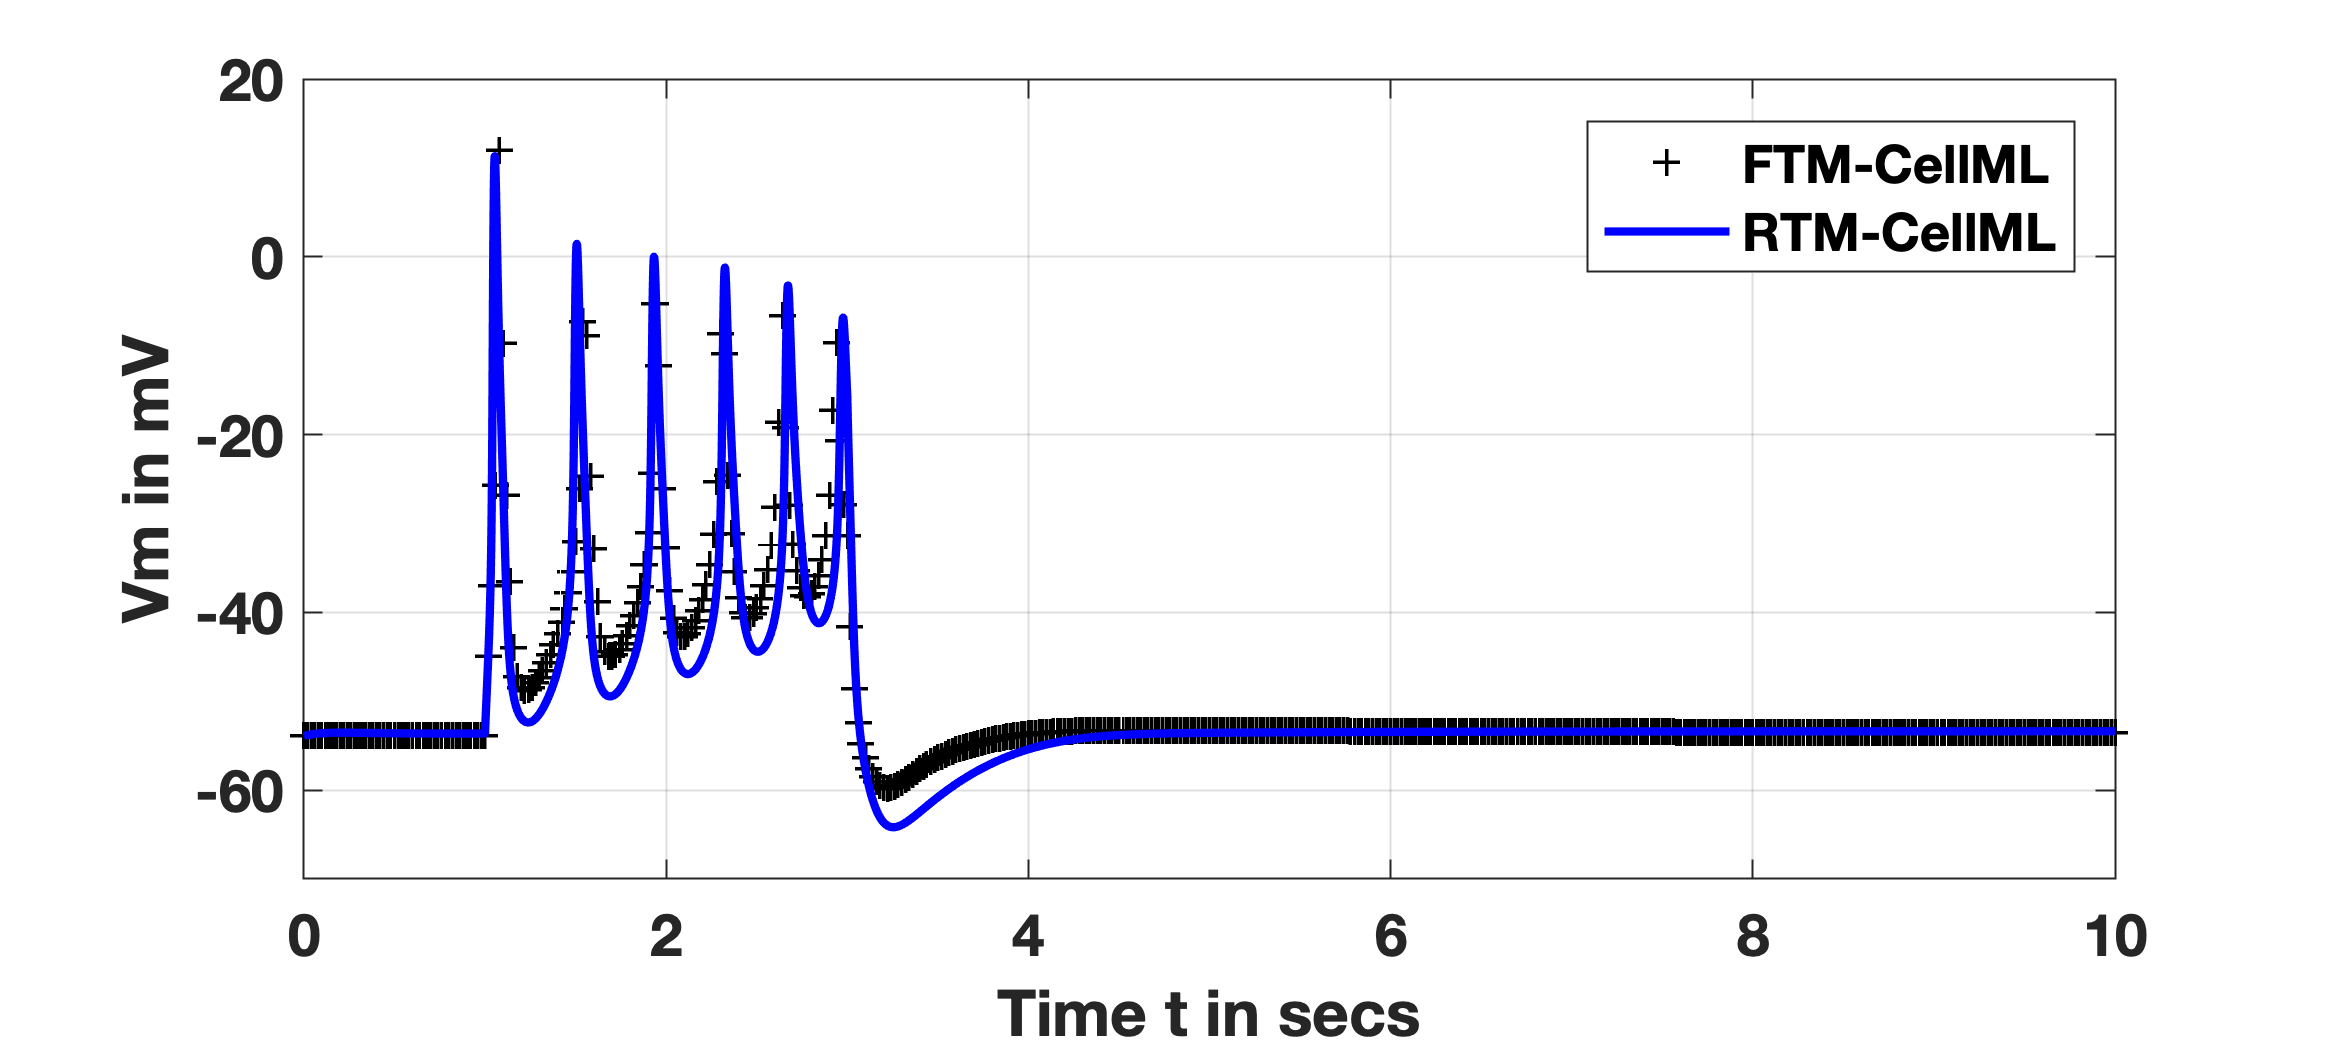 SSP Reproduction: FTM and RTM results: black ’+’ and blue trace, respectively. All initial conditions are identical between them with an applied stimulus, I_{stim} of -0.5 pA/pF for two seconds initiated at time t=1.0 secs.